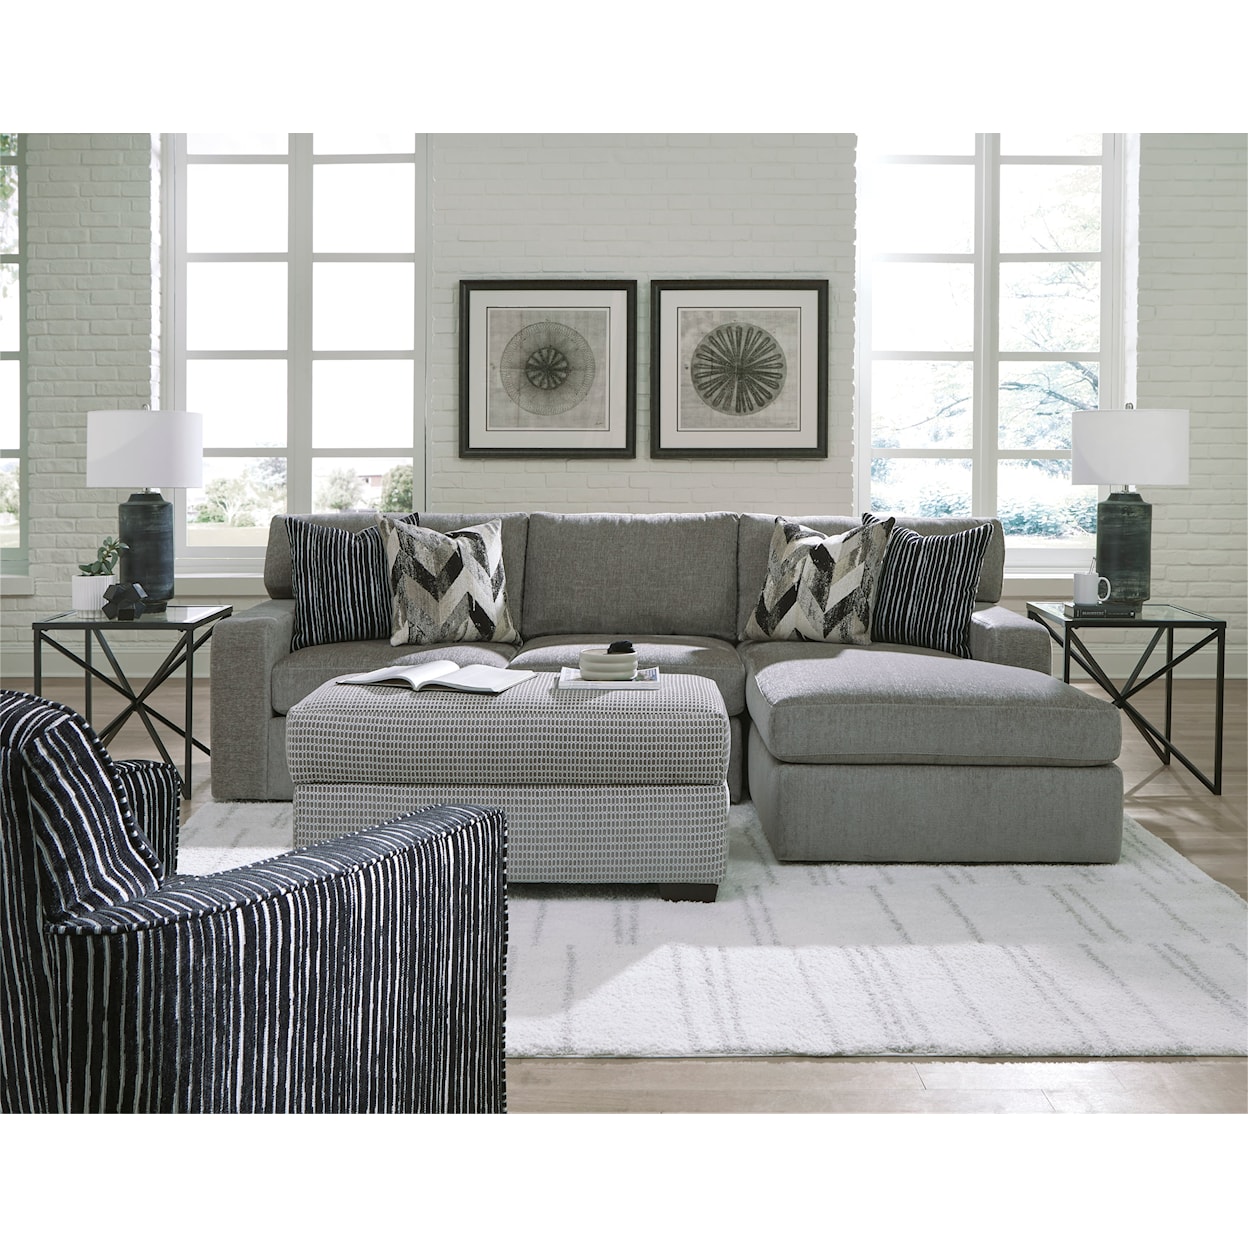 Behold Home BH3480 Hynde 4-Piece Living Room Set